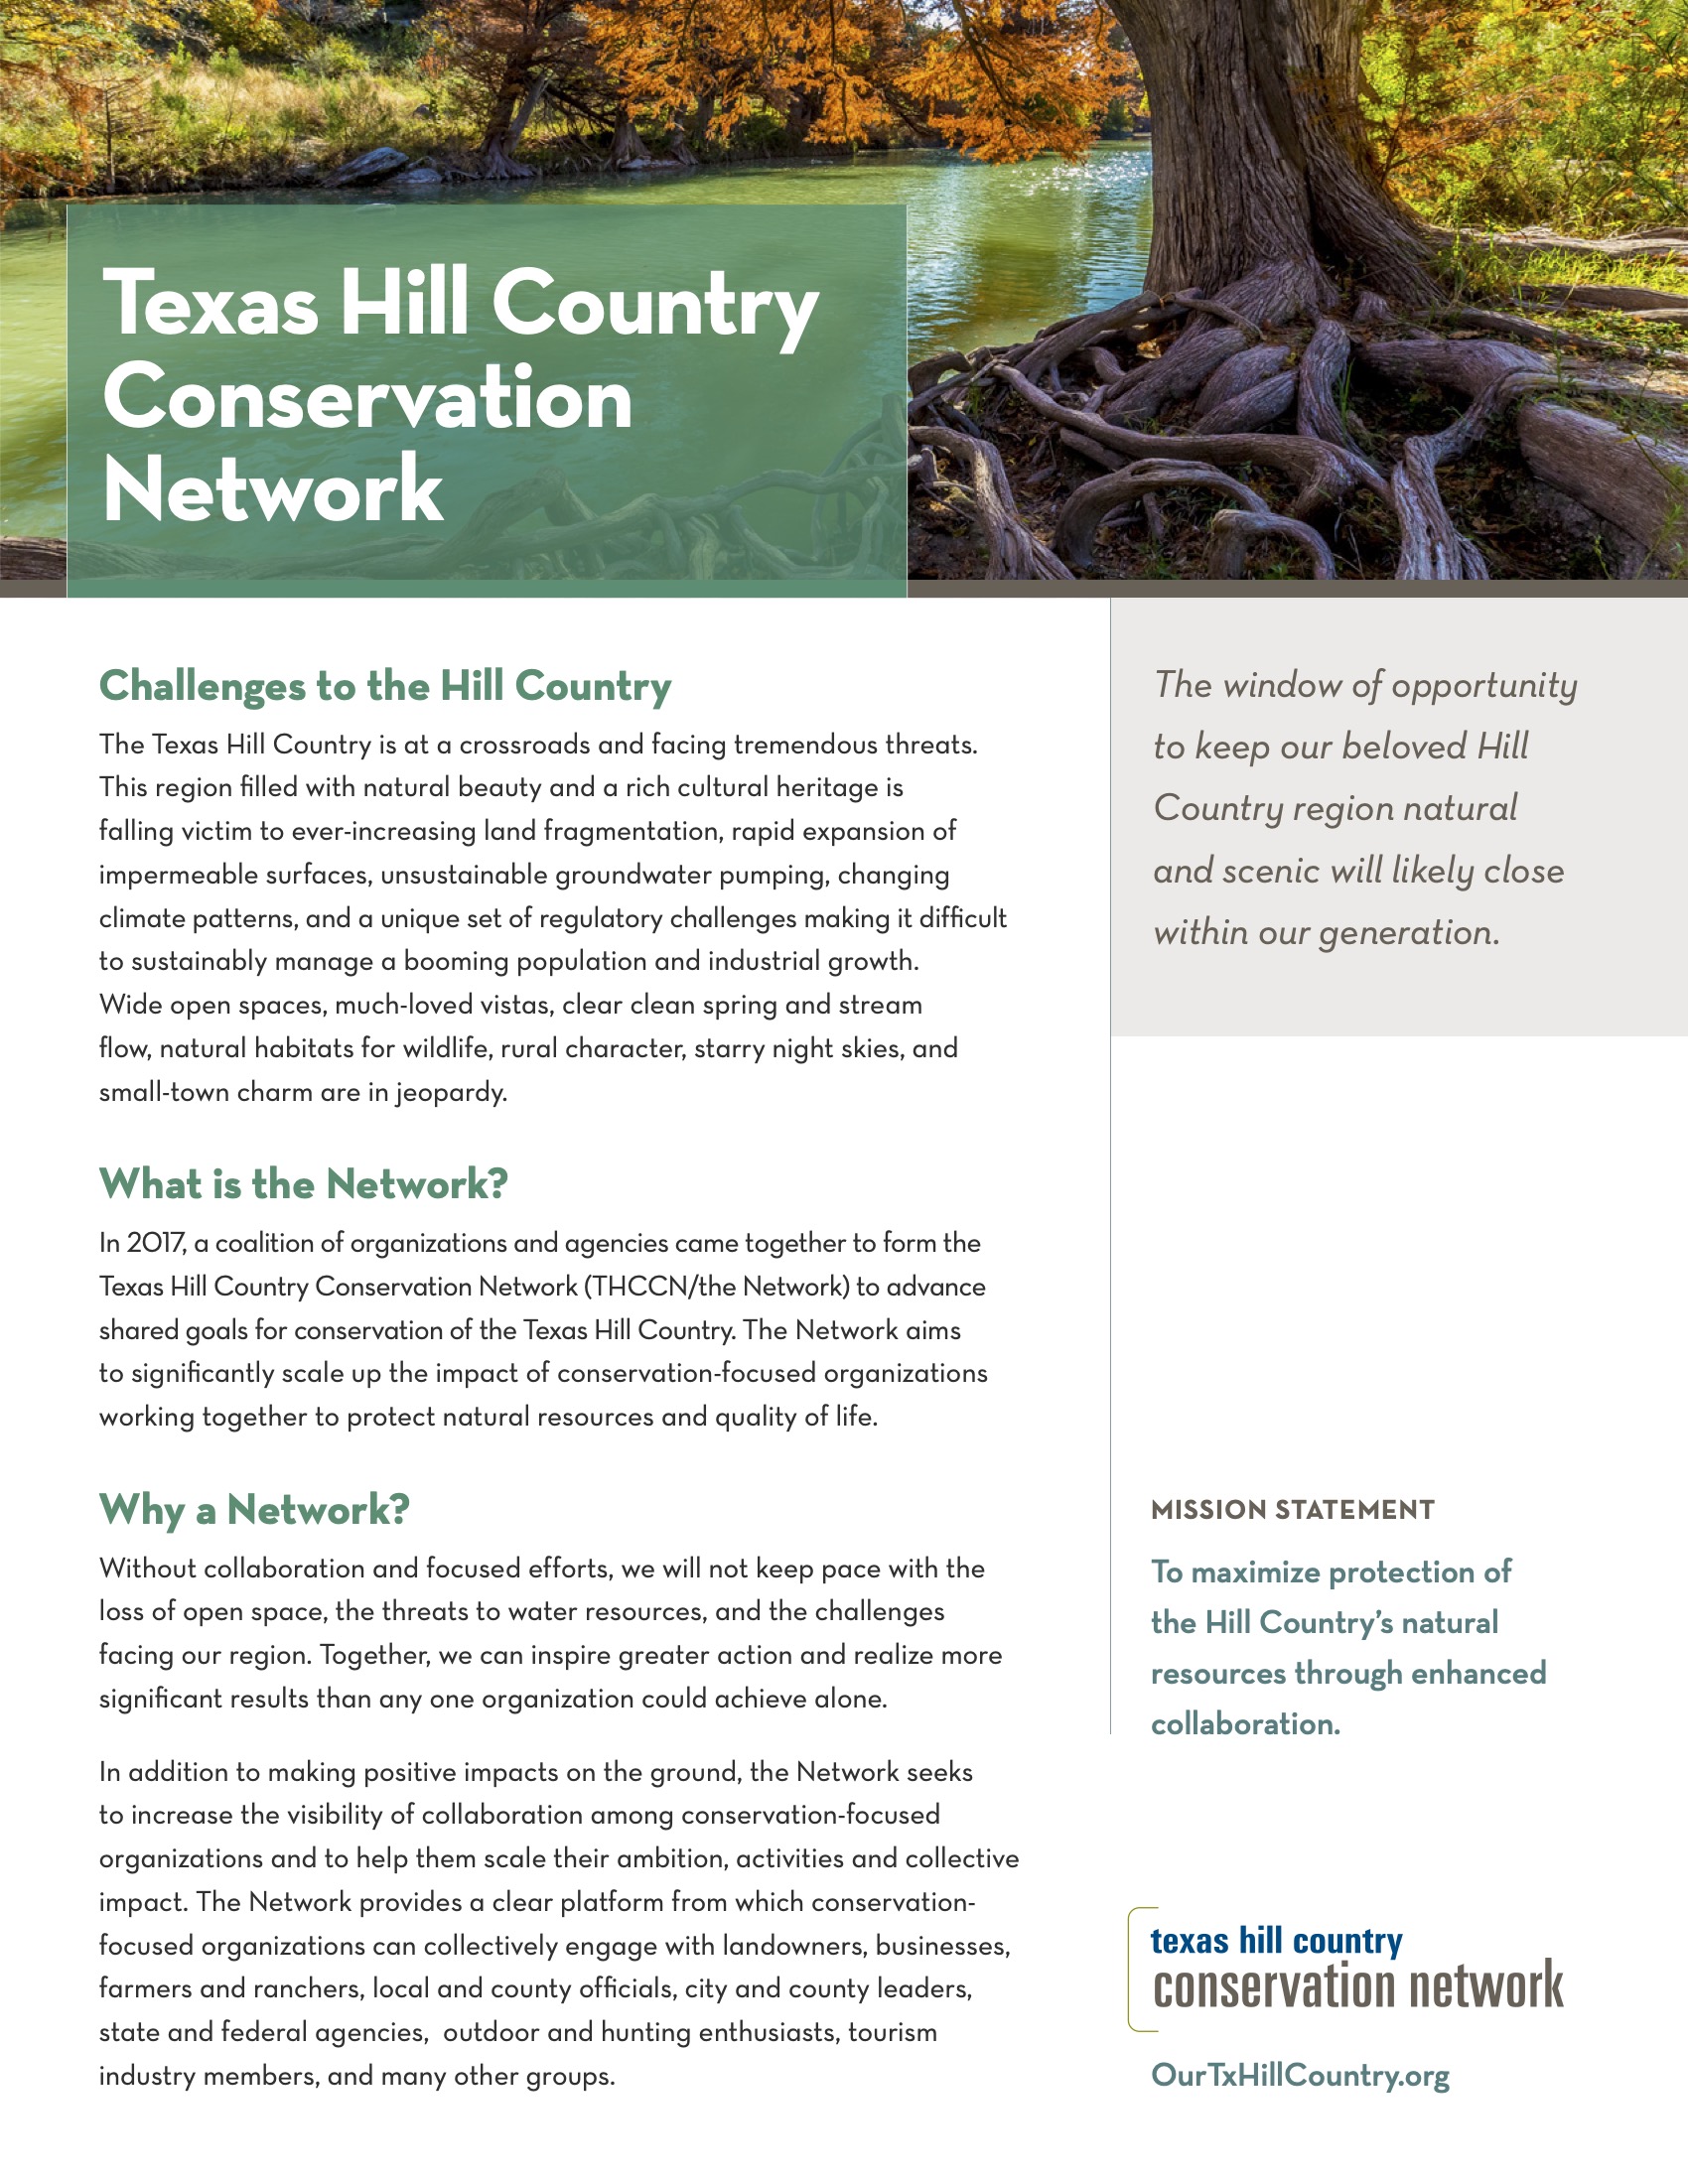 Texas Hill Country Conservation Network one-pager